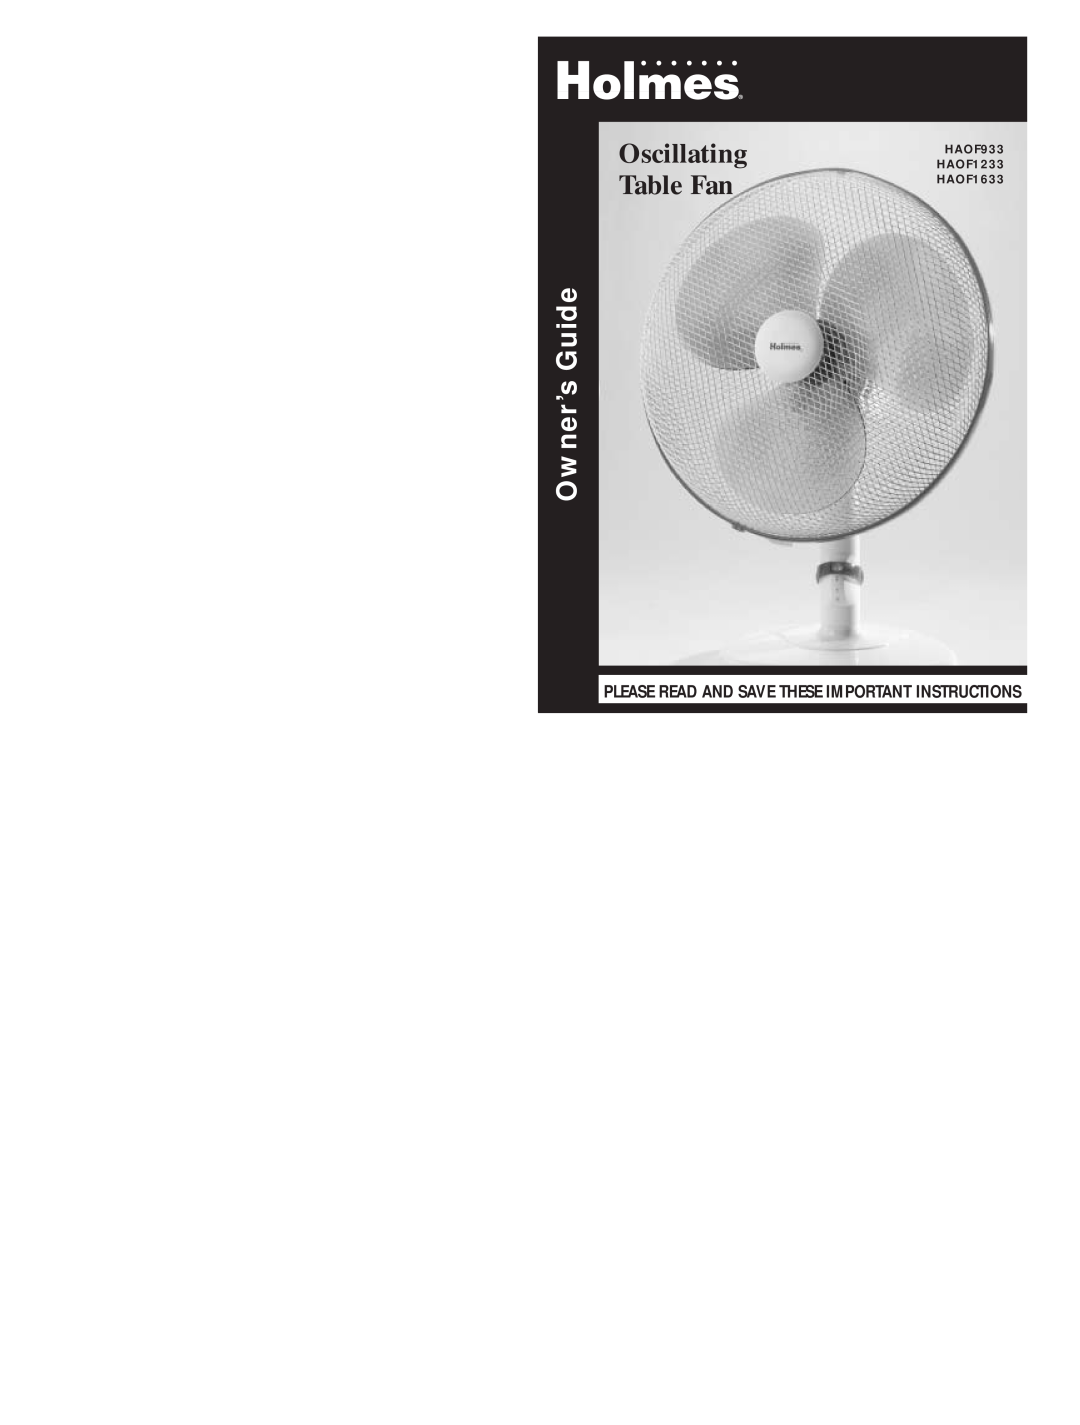 Holmes HAOF1633, HAOF933 warranty Oscillating Table Fan, Owner’s Guide, Please Read And Save These Important Instructions 